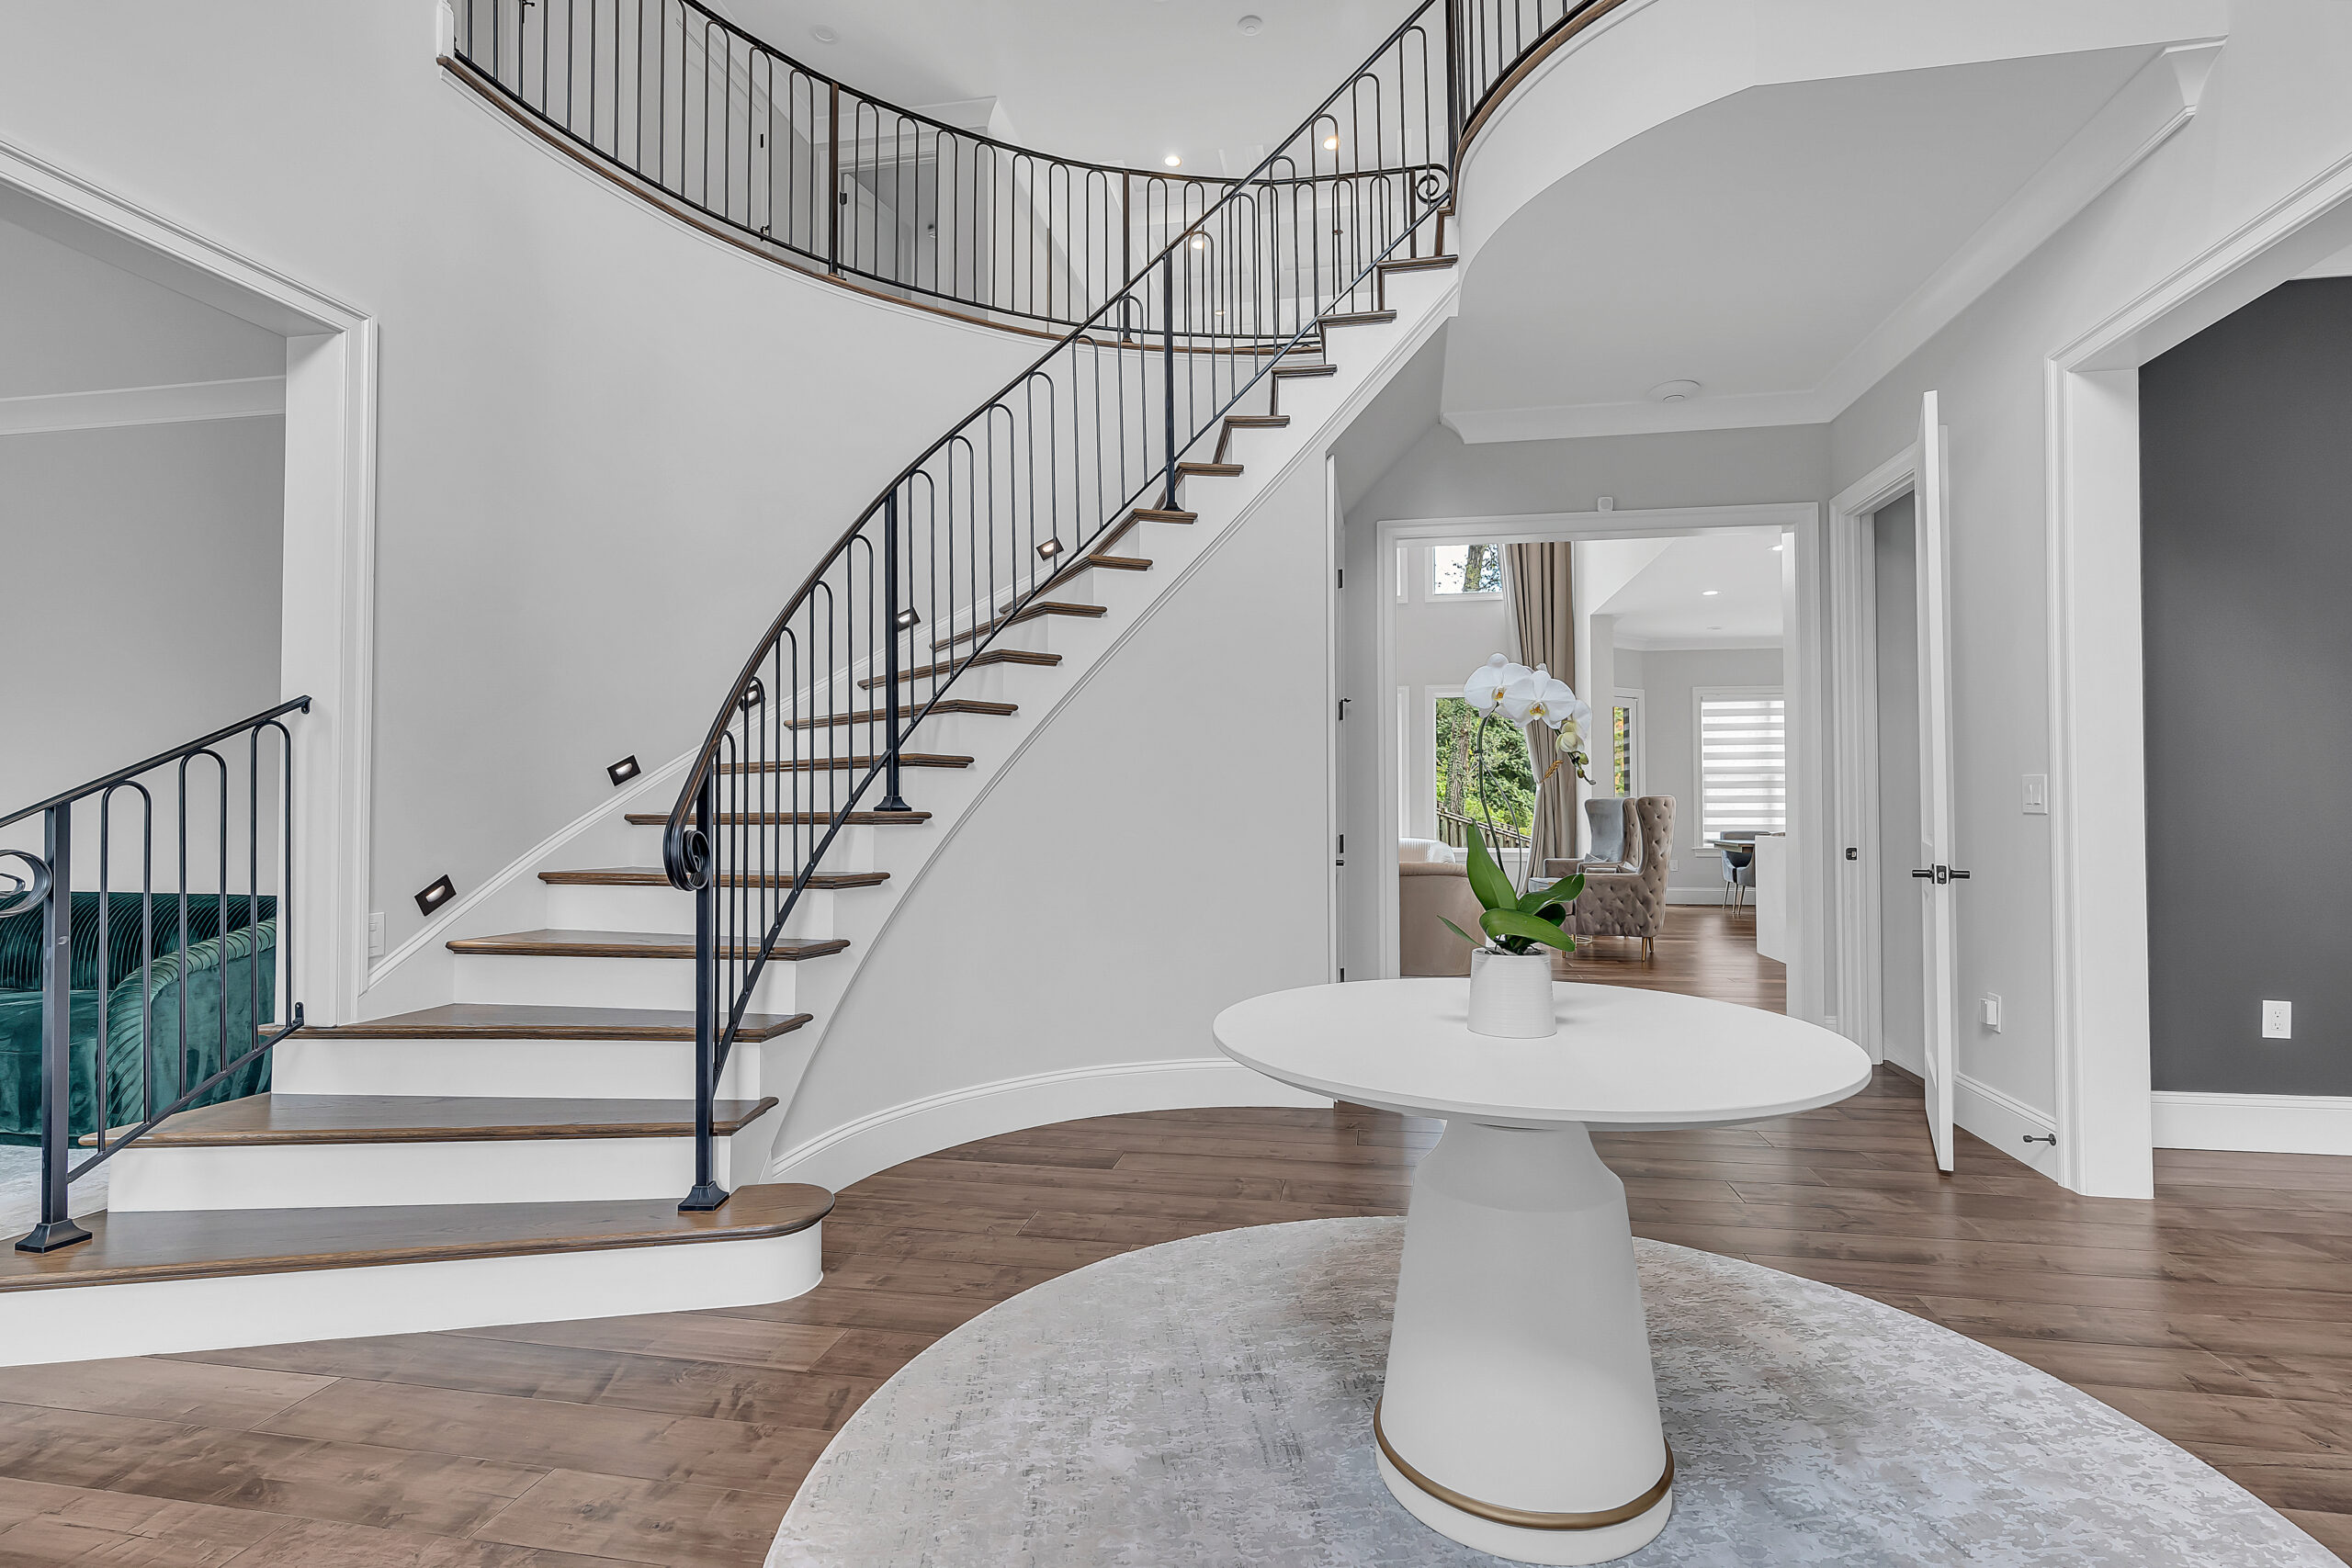 Luxury interior with view of stairs